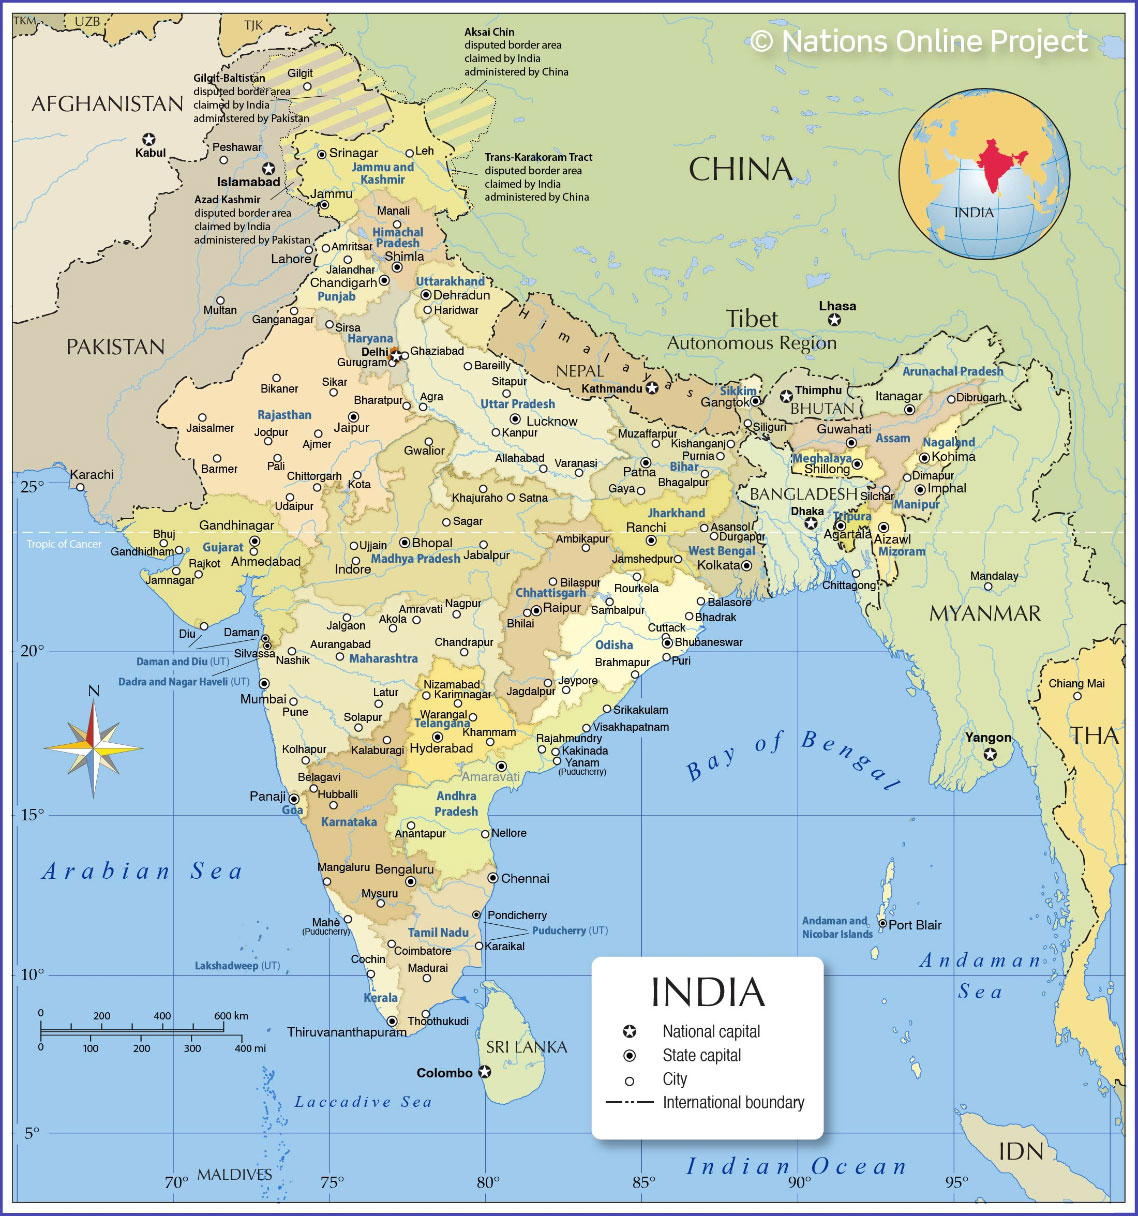 Which is the Largest, Second Largest, and Smallest State in India?